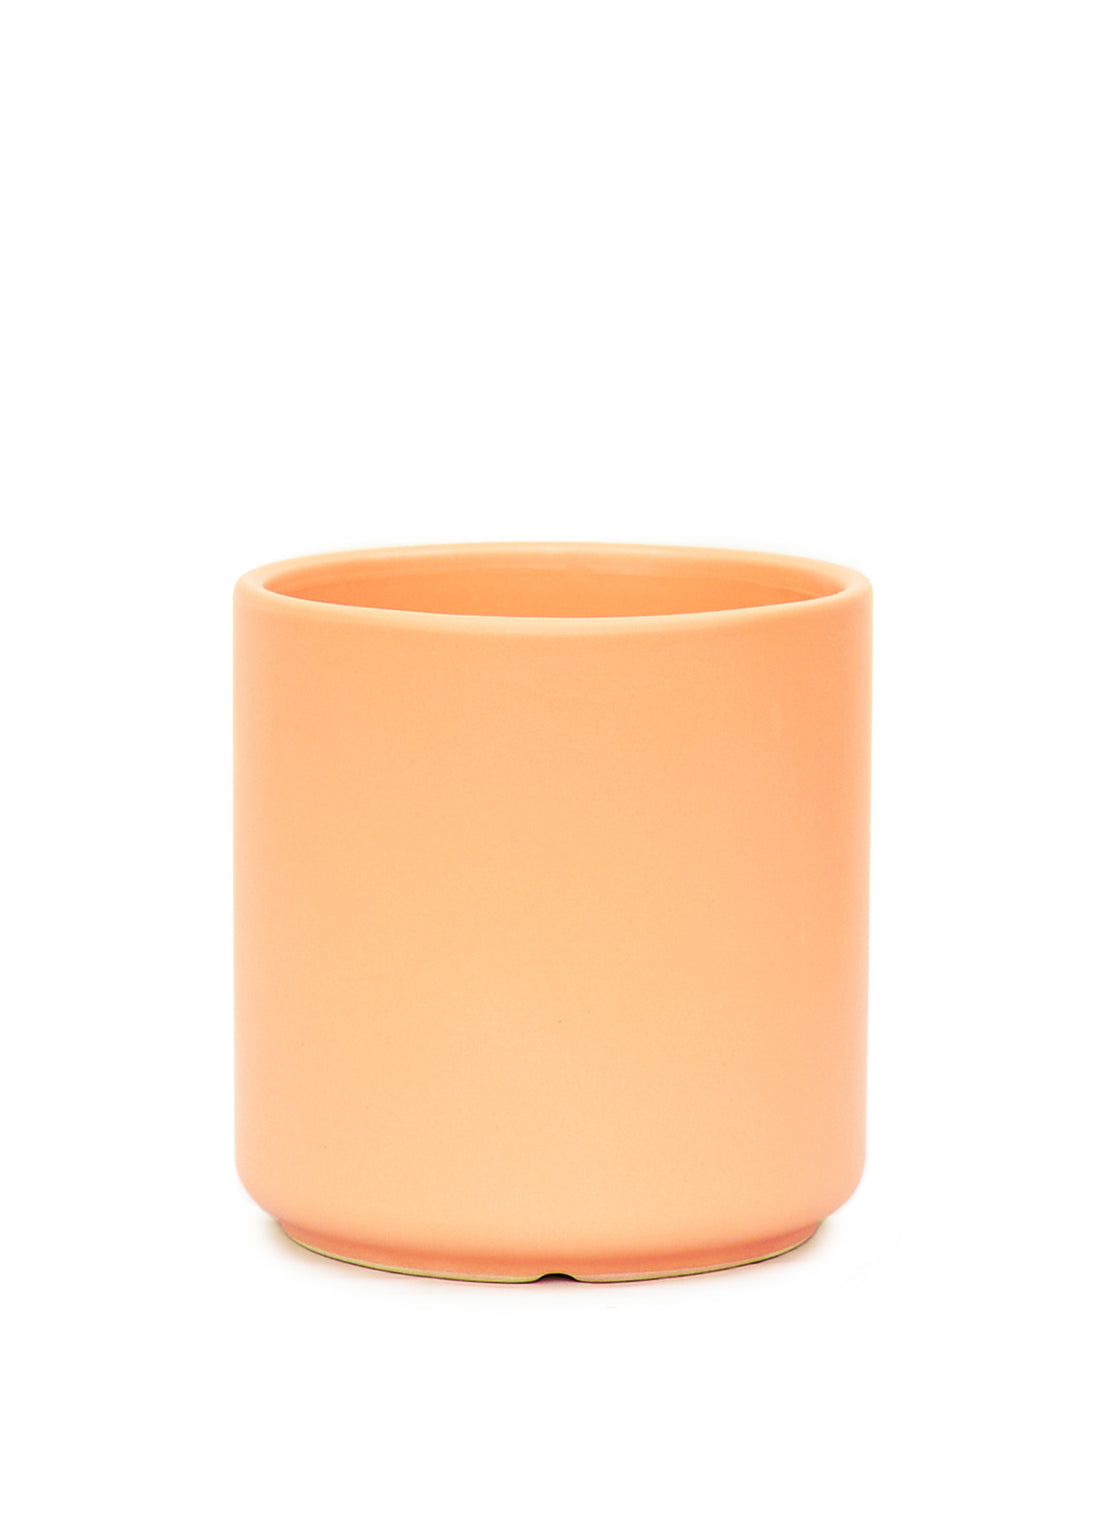 Cylindrical Ceramic Planter, Peach 7&quot; Wide - Hive Plants - 